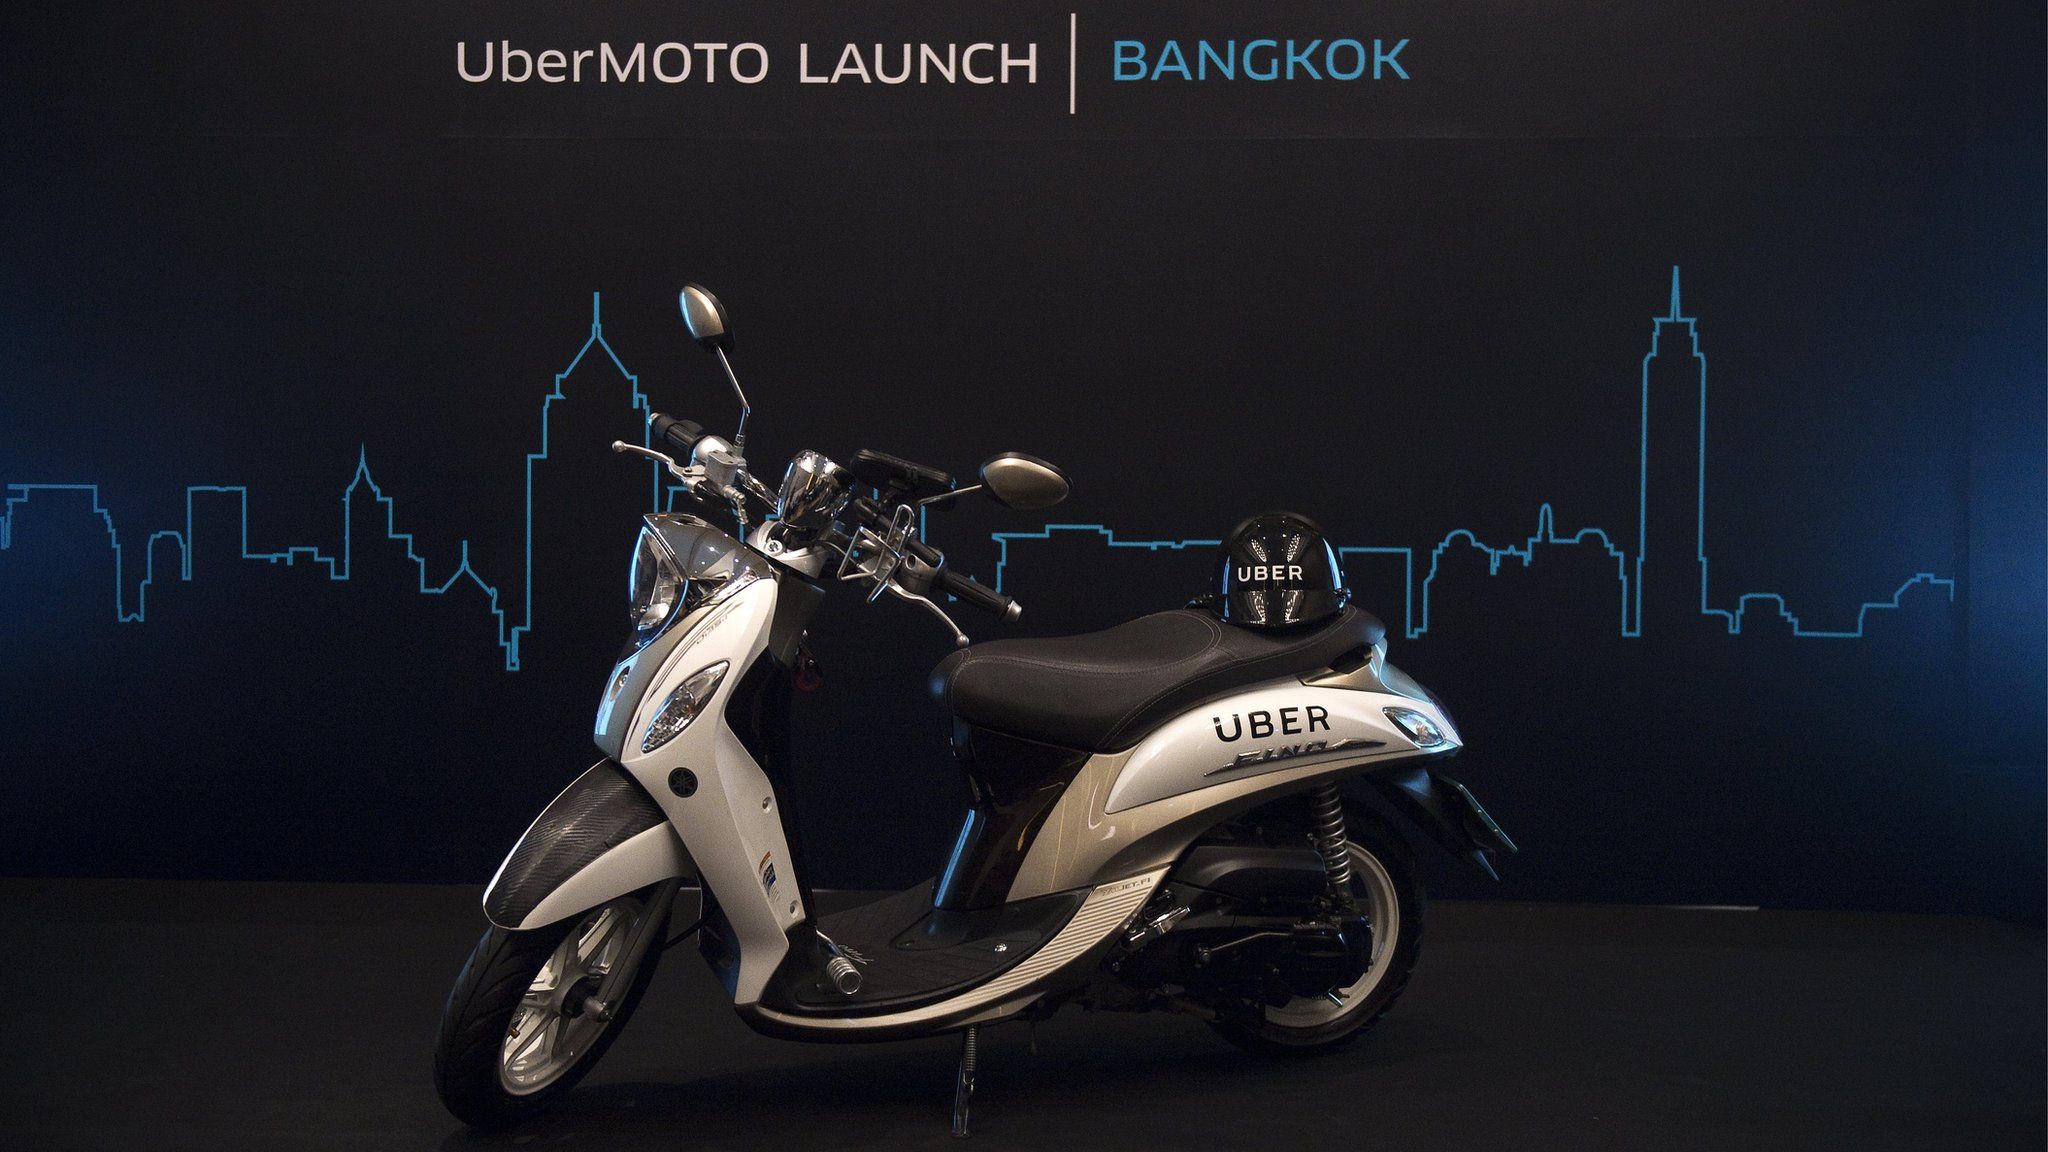 Uber offered its first motorbike taxi service on February 24, launching a pilot scheme in Bangkok which could spread across Asia as it takes on chief regional rival Grab Taxi.